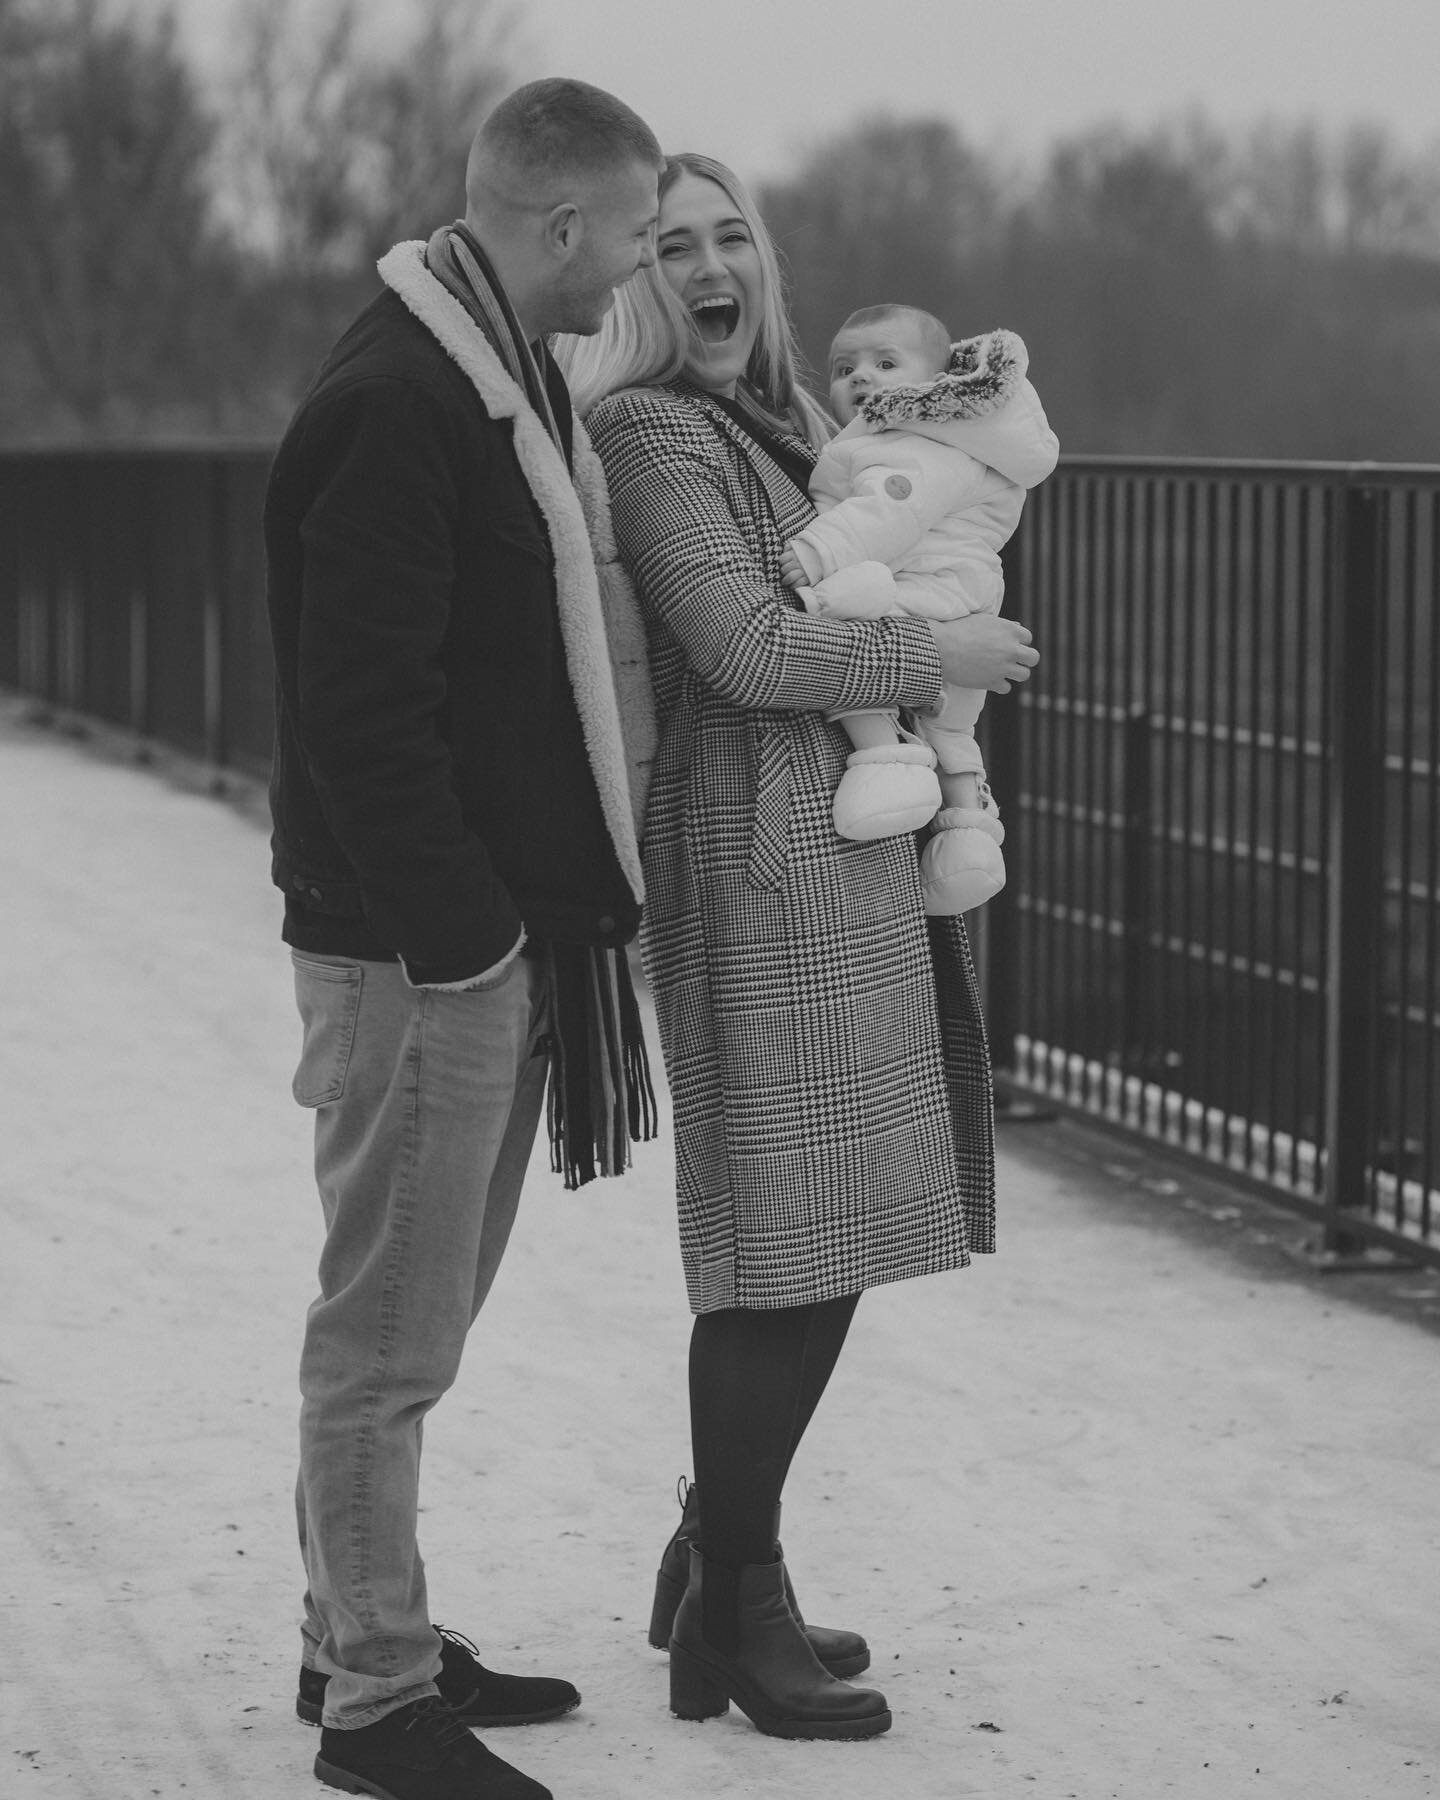 Winter fun ❄️ 

Sharing a few b&amp;w sneak peeks from this gorgeous snowy photoshoot. Capturing the love and laughter between this lovely family. 
The white snowy ground making it even more magical 😍🤍

#familyphotography #family #familyphotographe